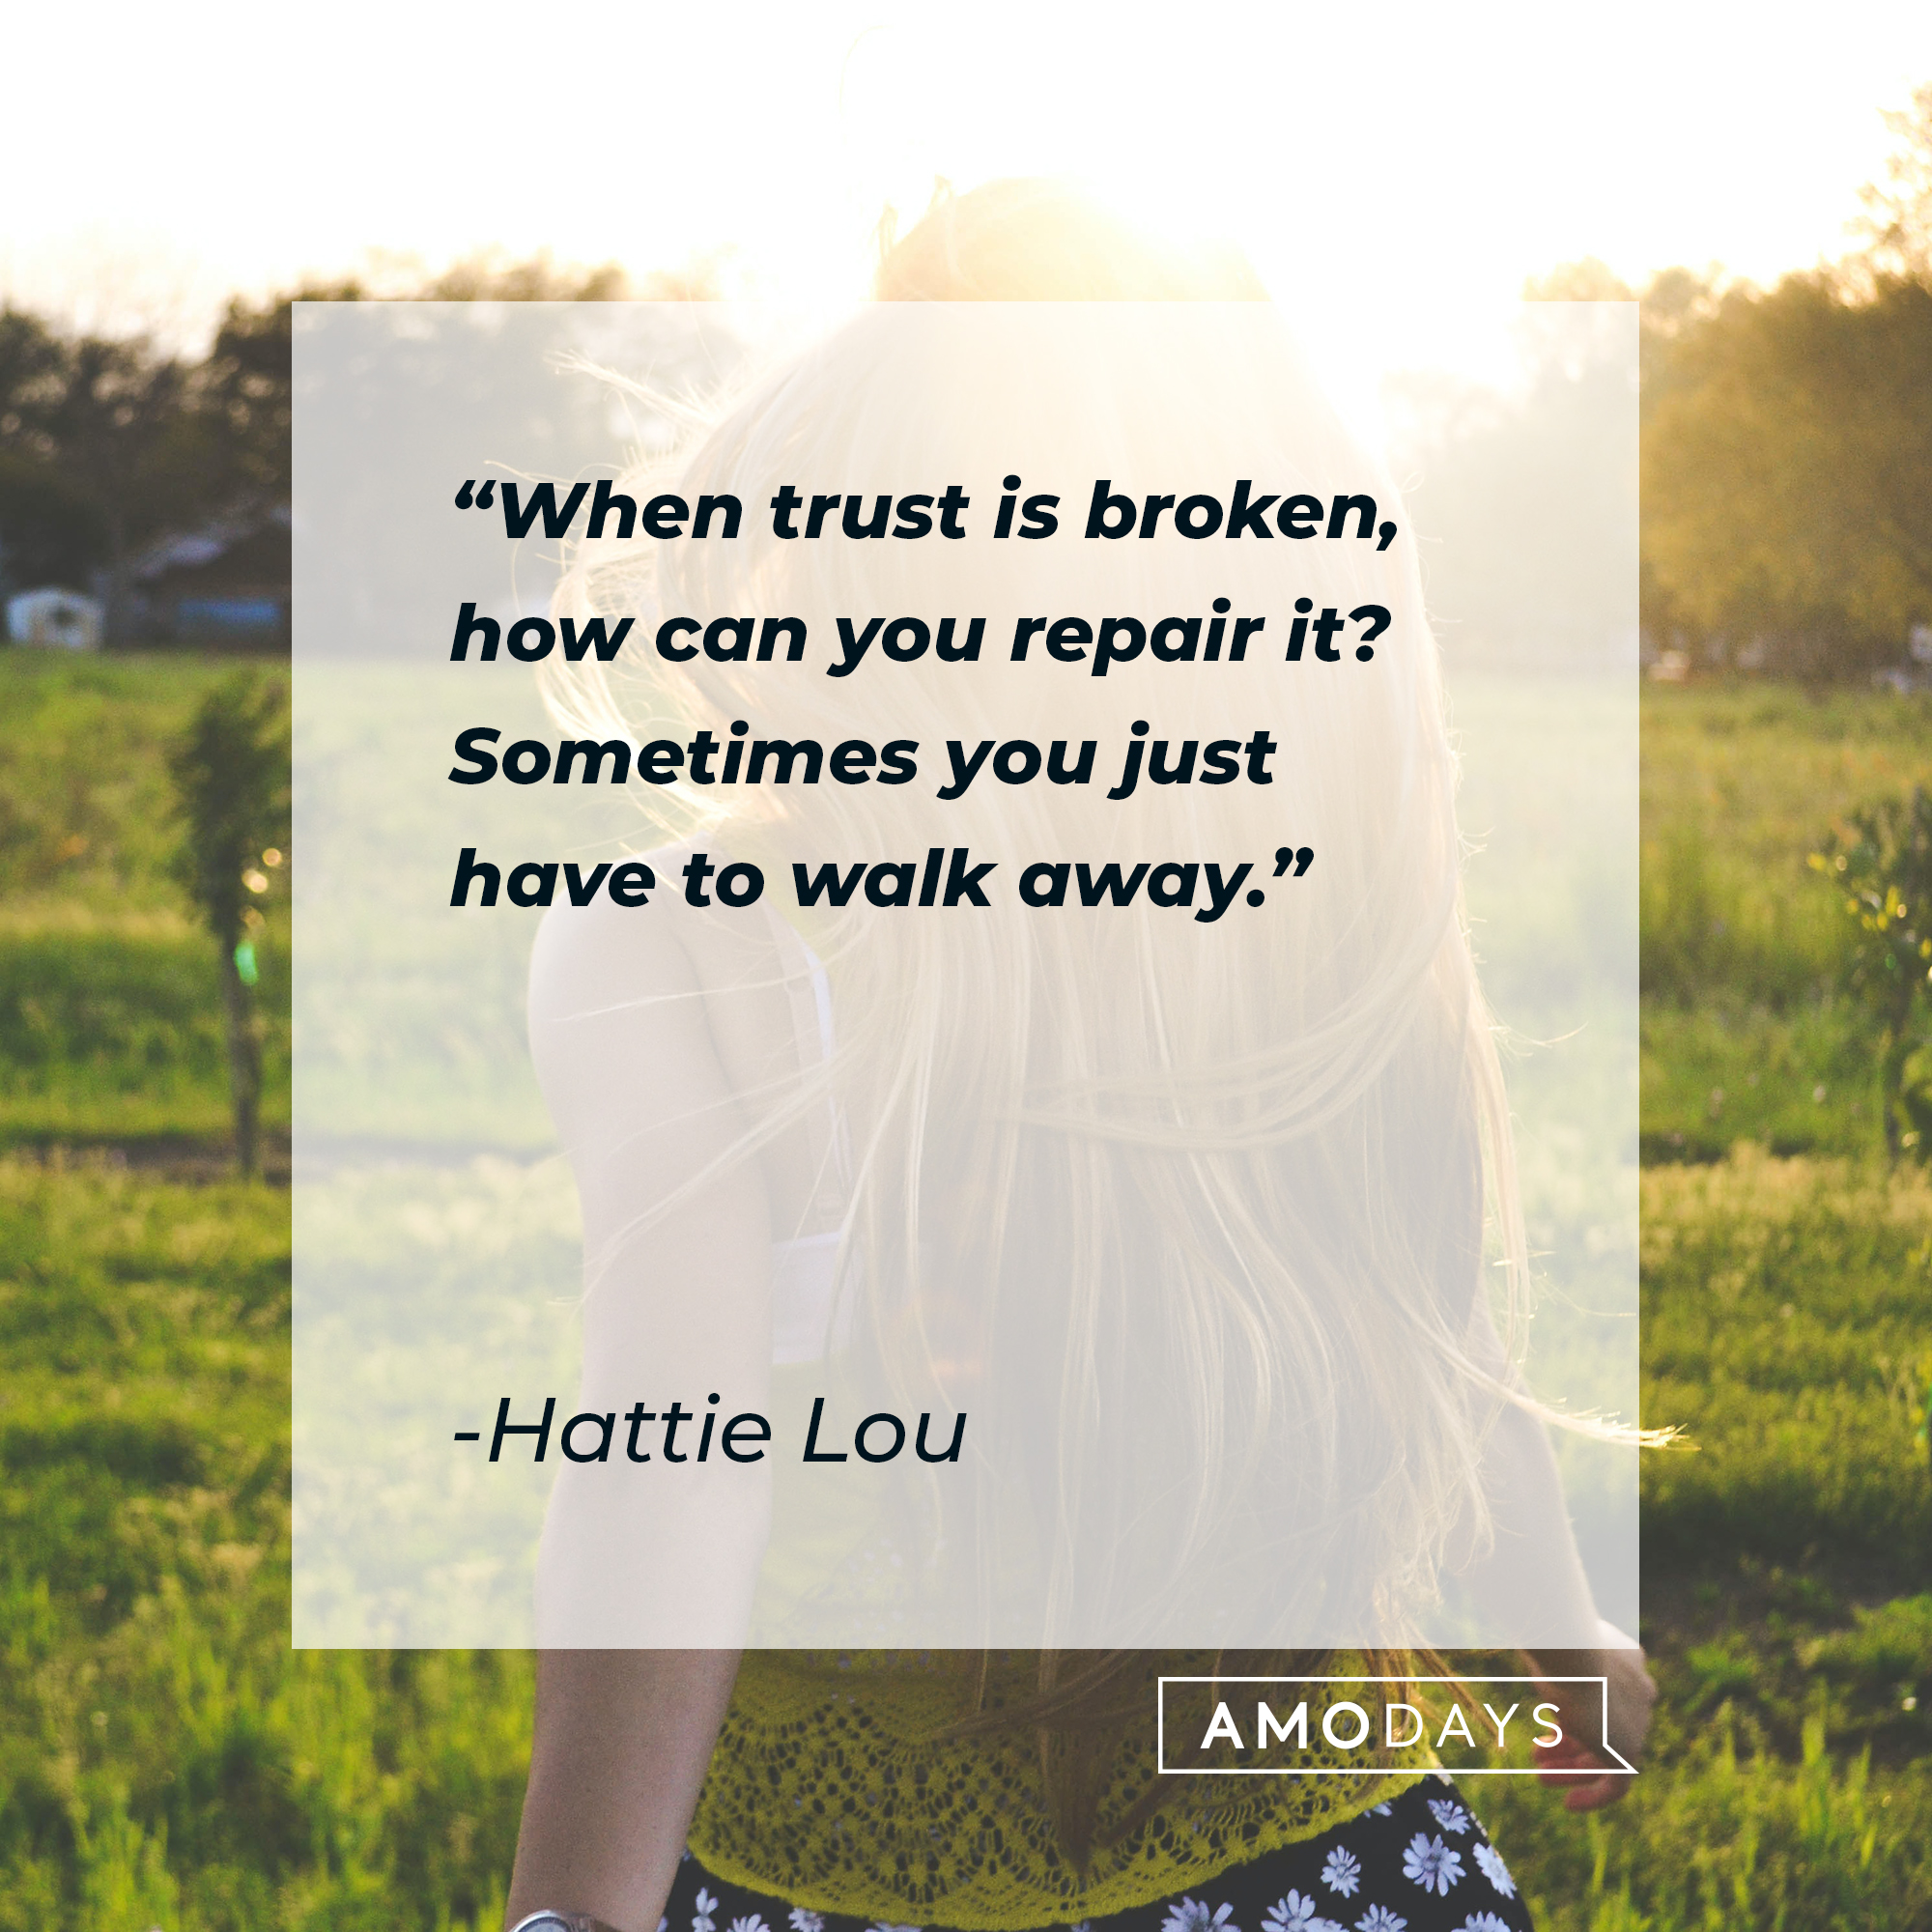 Hattie Lou's quote: "When trust is broken, how can you repair it? Sometimes you just have to walk away." | Image: Unsplash.com